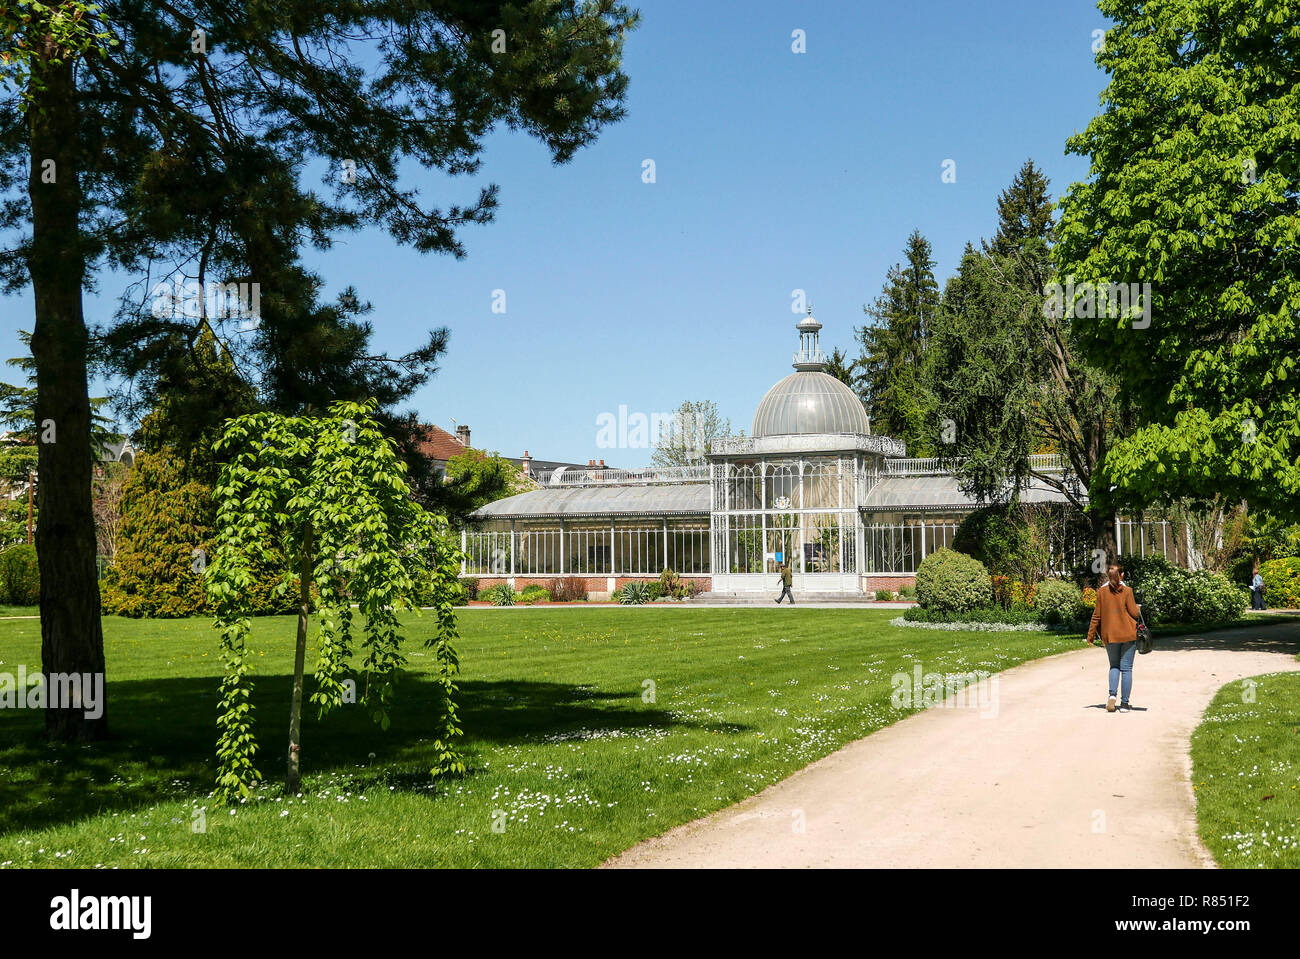 Tarbes (south-western France): Jardin Massey, built in the XIXth century, was awarded the  'Jardin remarquable' label (Remarkable Garden of France) by Stock Photo